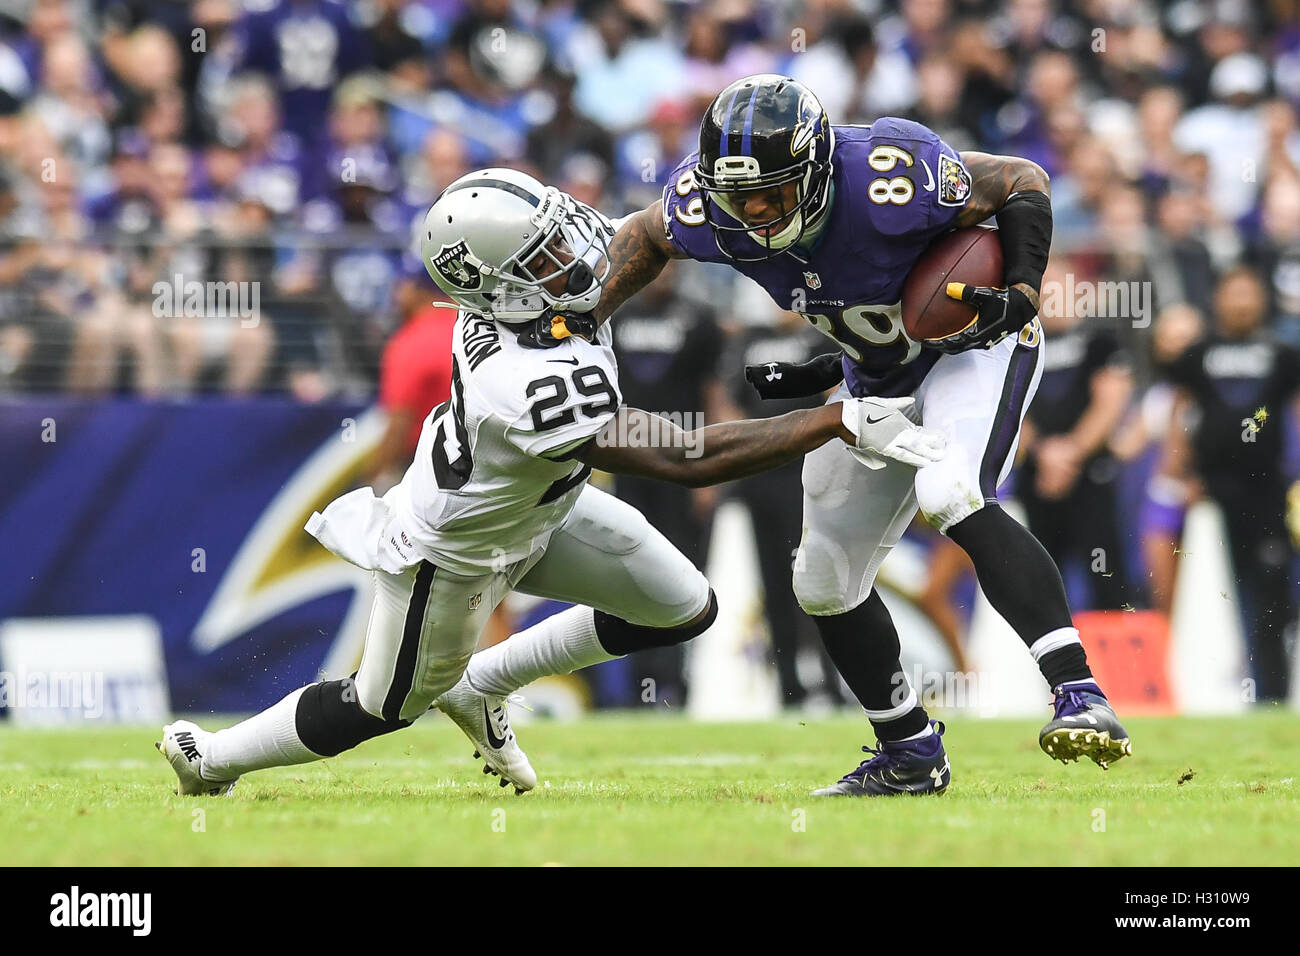 Baltimore, Maryland, USA. 2nd Oct, 2016. Baltimore Ravens wide receiver STEVEN SMITH SR. (89) avoids being tackled by Oakland Raider player DAVID AMERSON (29) at M & T Bank Stadium in Baltimore, Maryland. Credit:  Amy Sanderson/ZUMA Wire/Alamy Live News Stock Photo